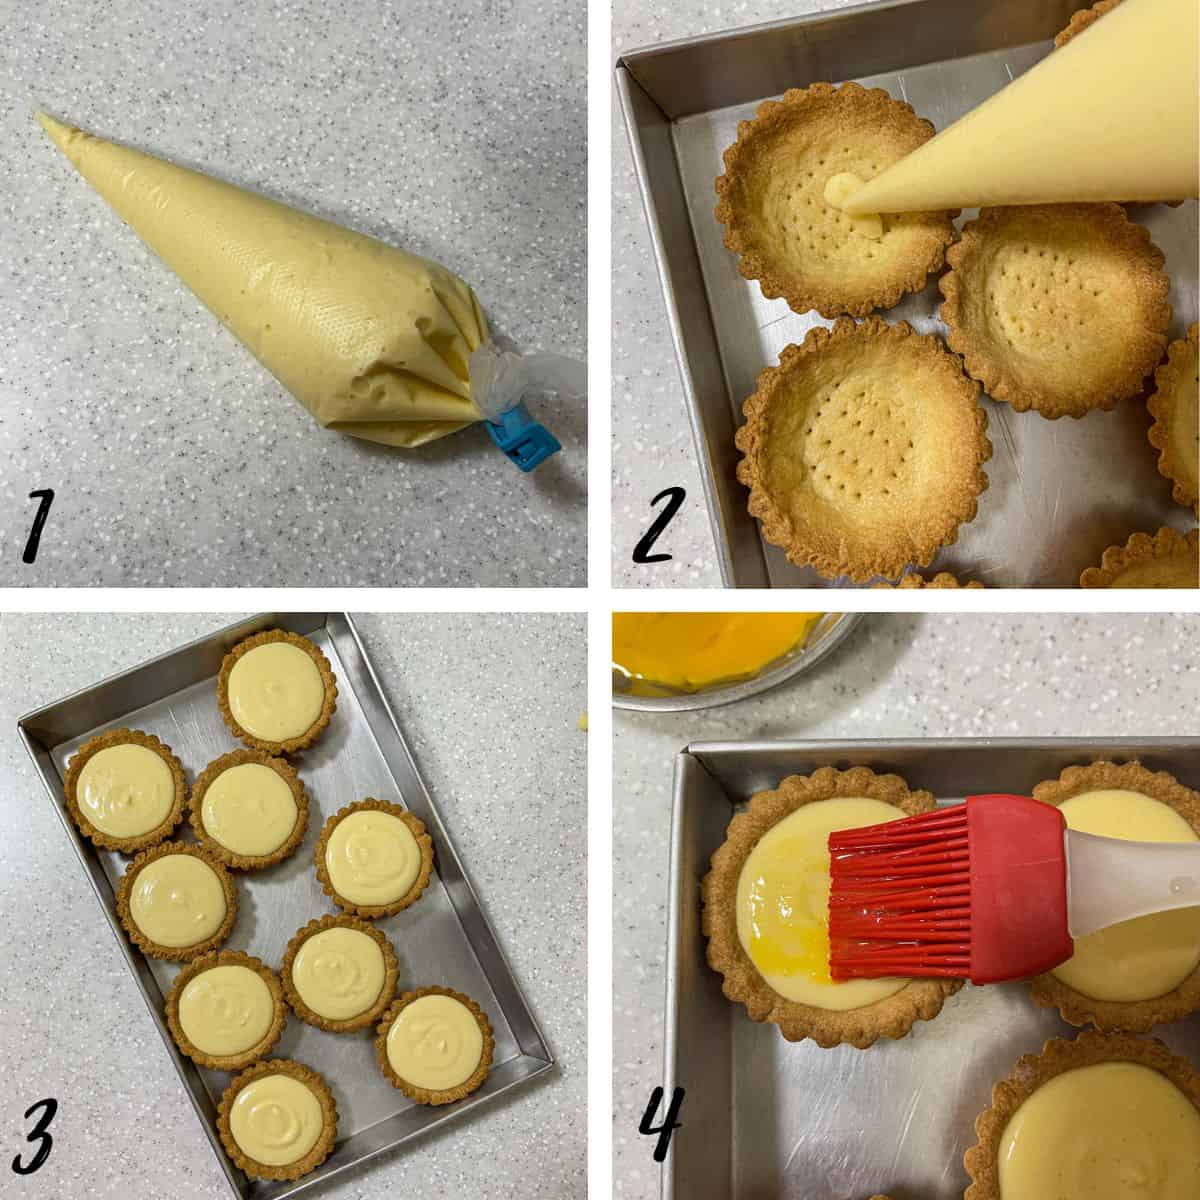 A poster of 4 images showing how to fill pastry shells with cheese filling and egg wash top.